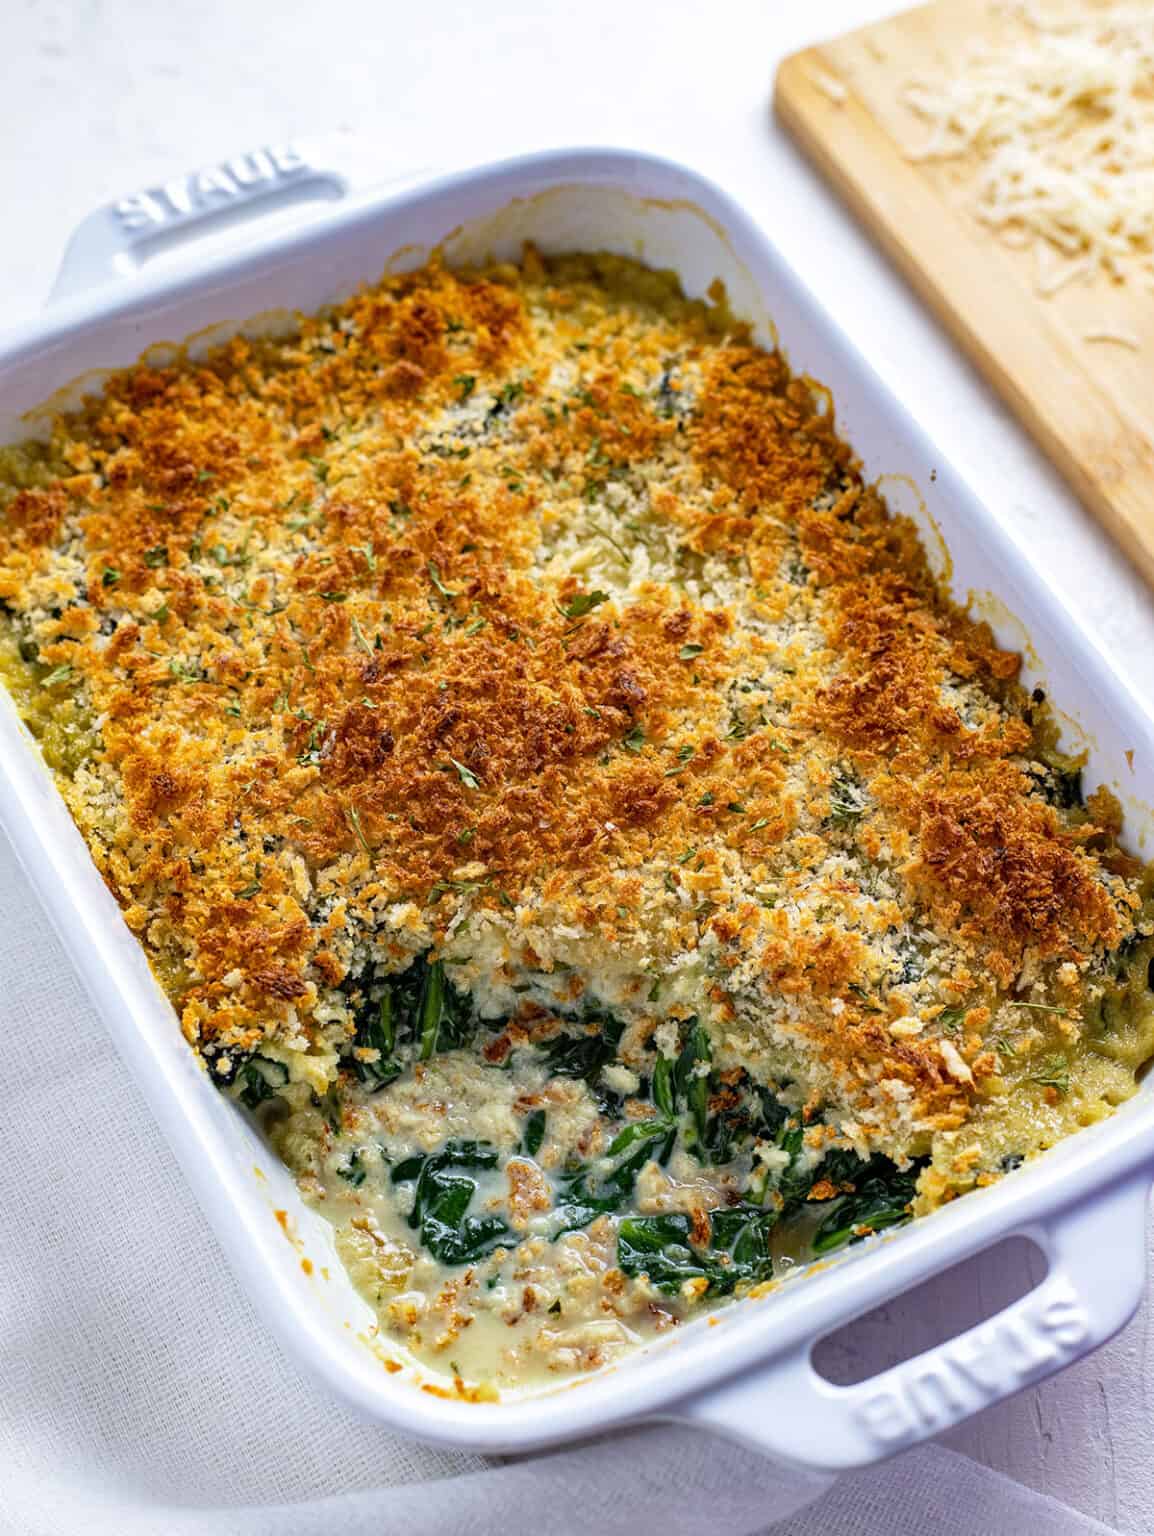 Easy and Delicious Spinach Parmesan Casserole - My Kitchen Serenity